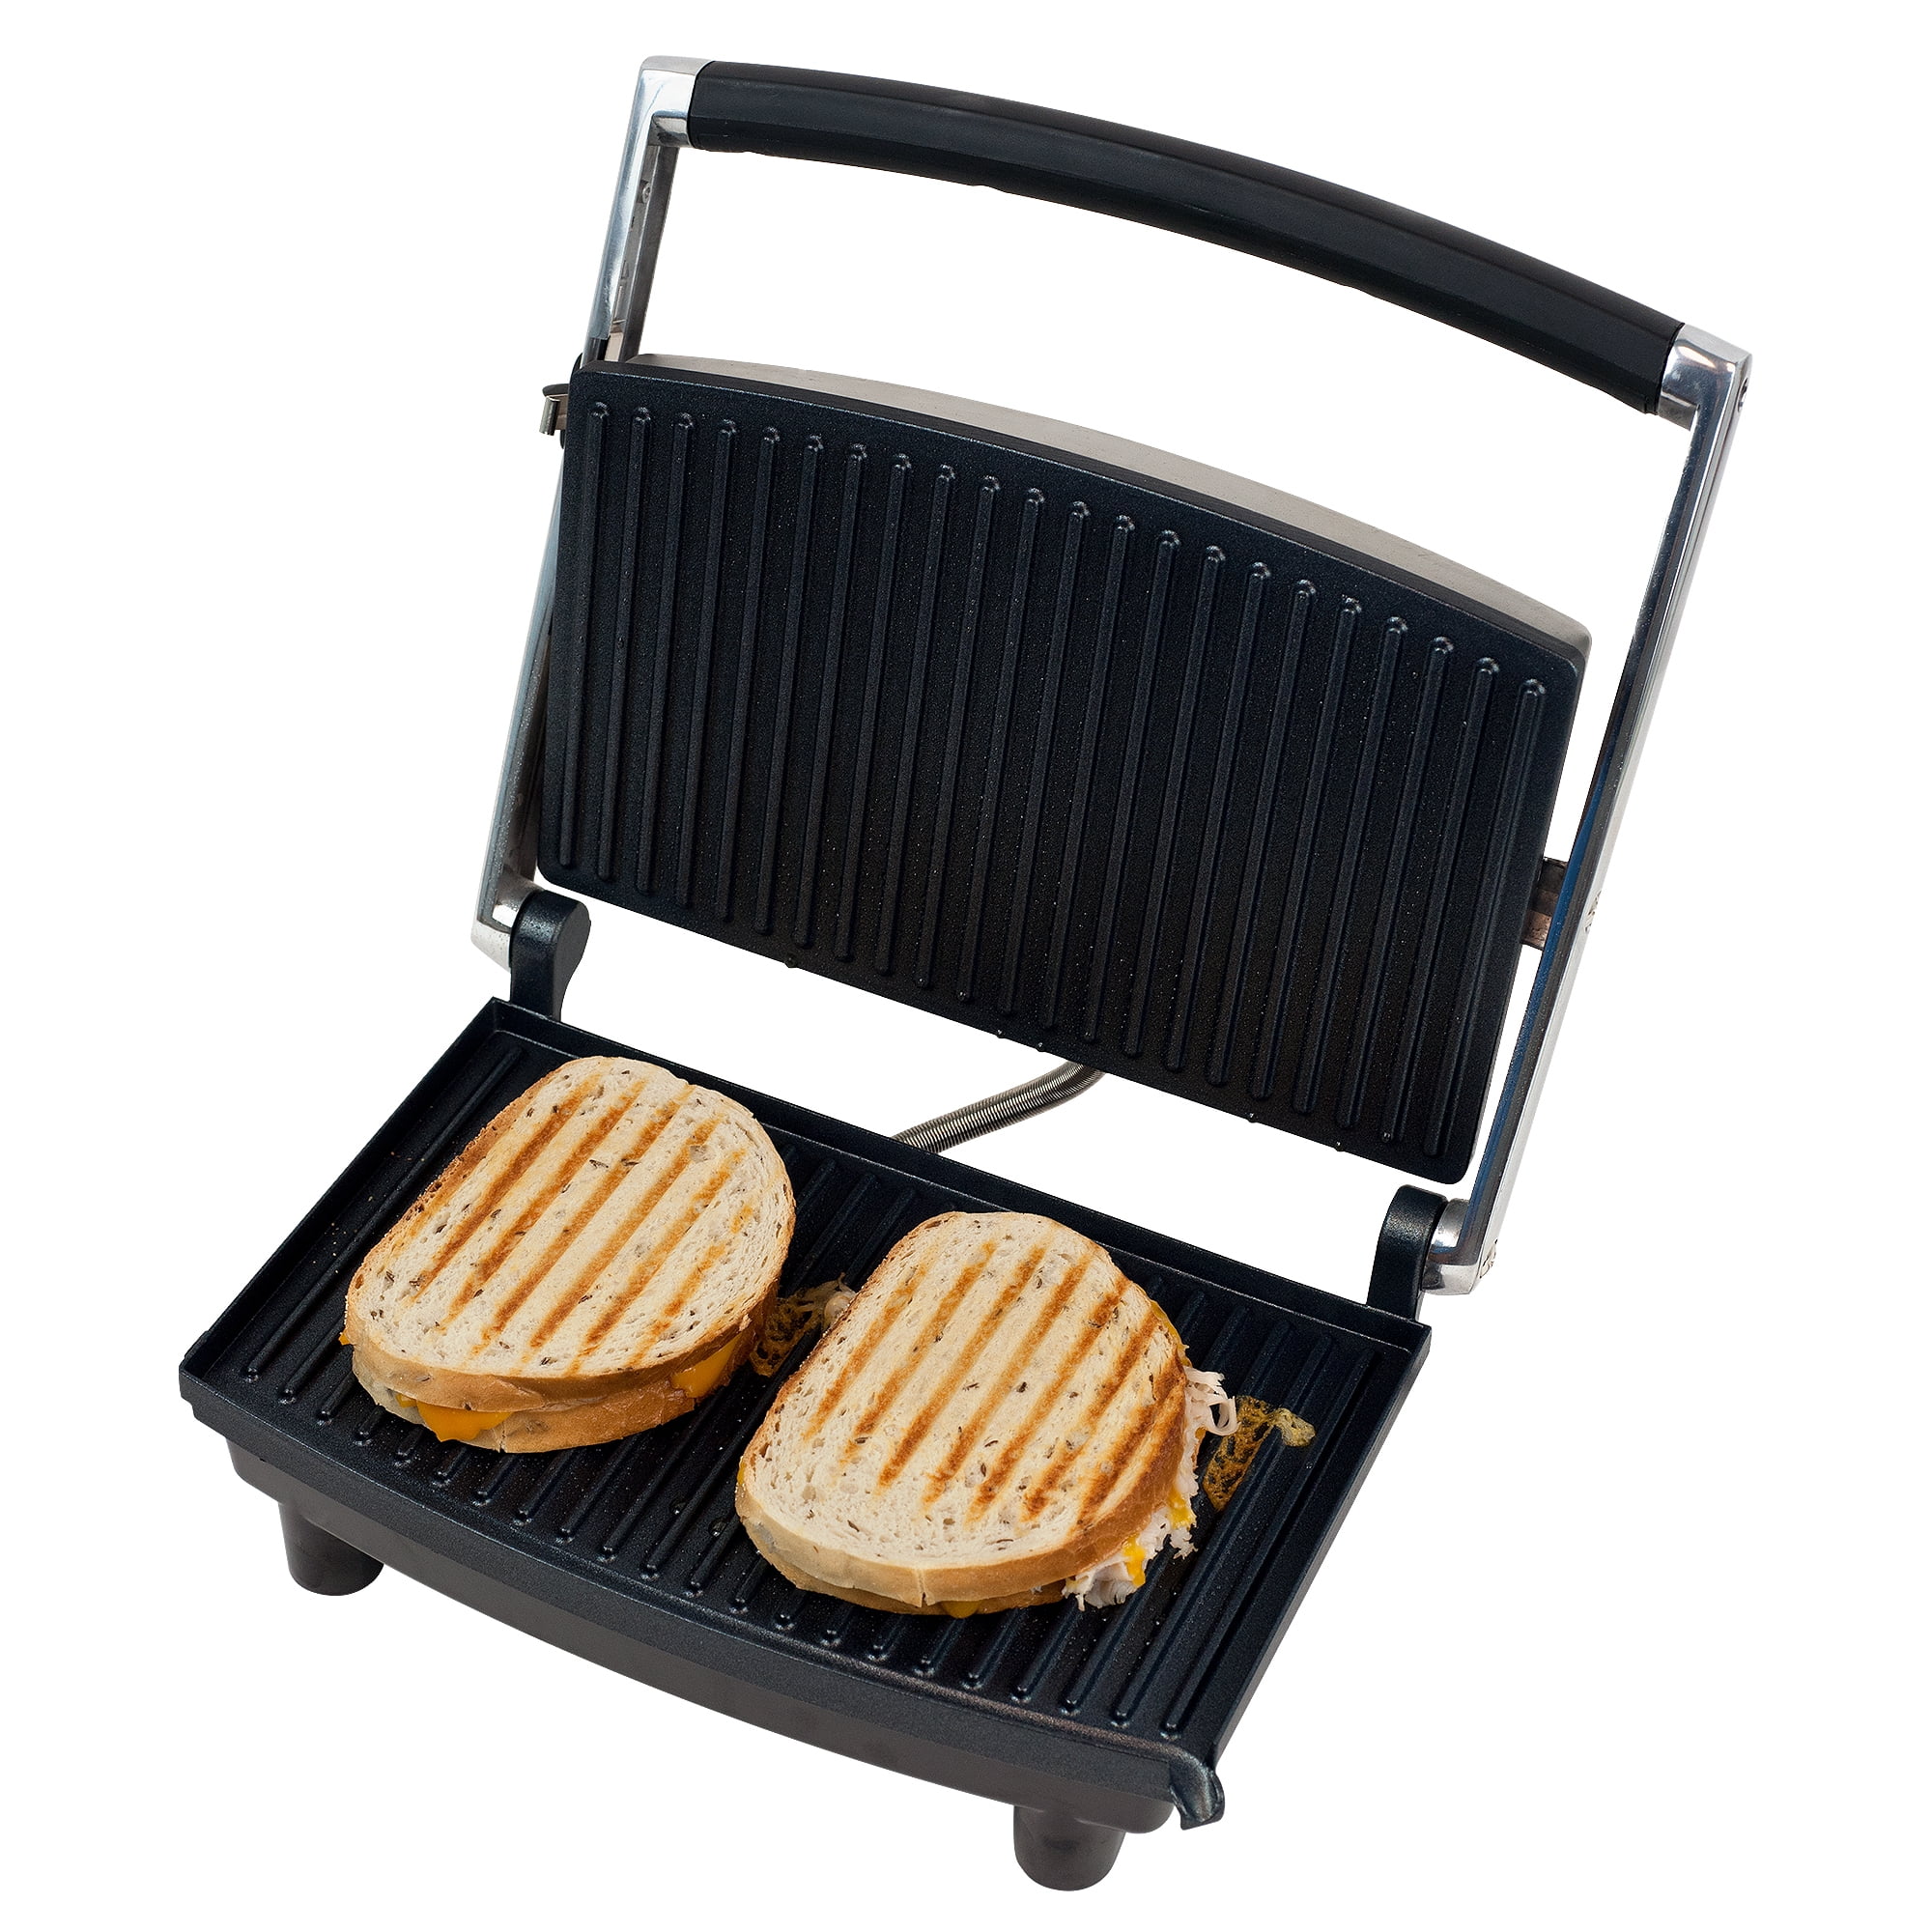 Panini/Sandwich Grills, Grooved Plates - Global Solutions